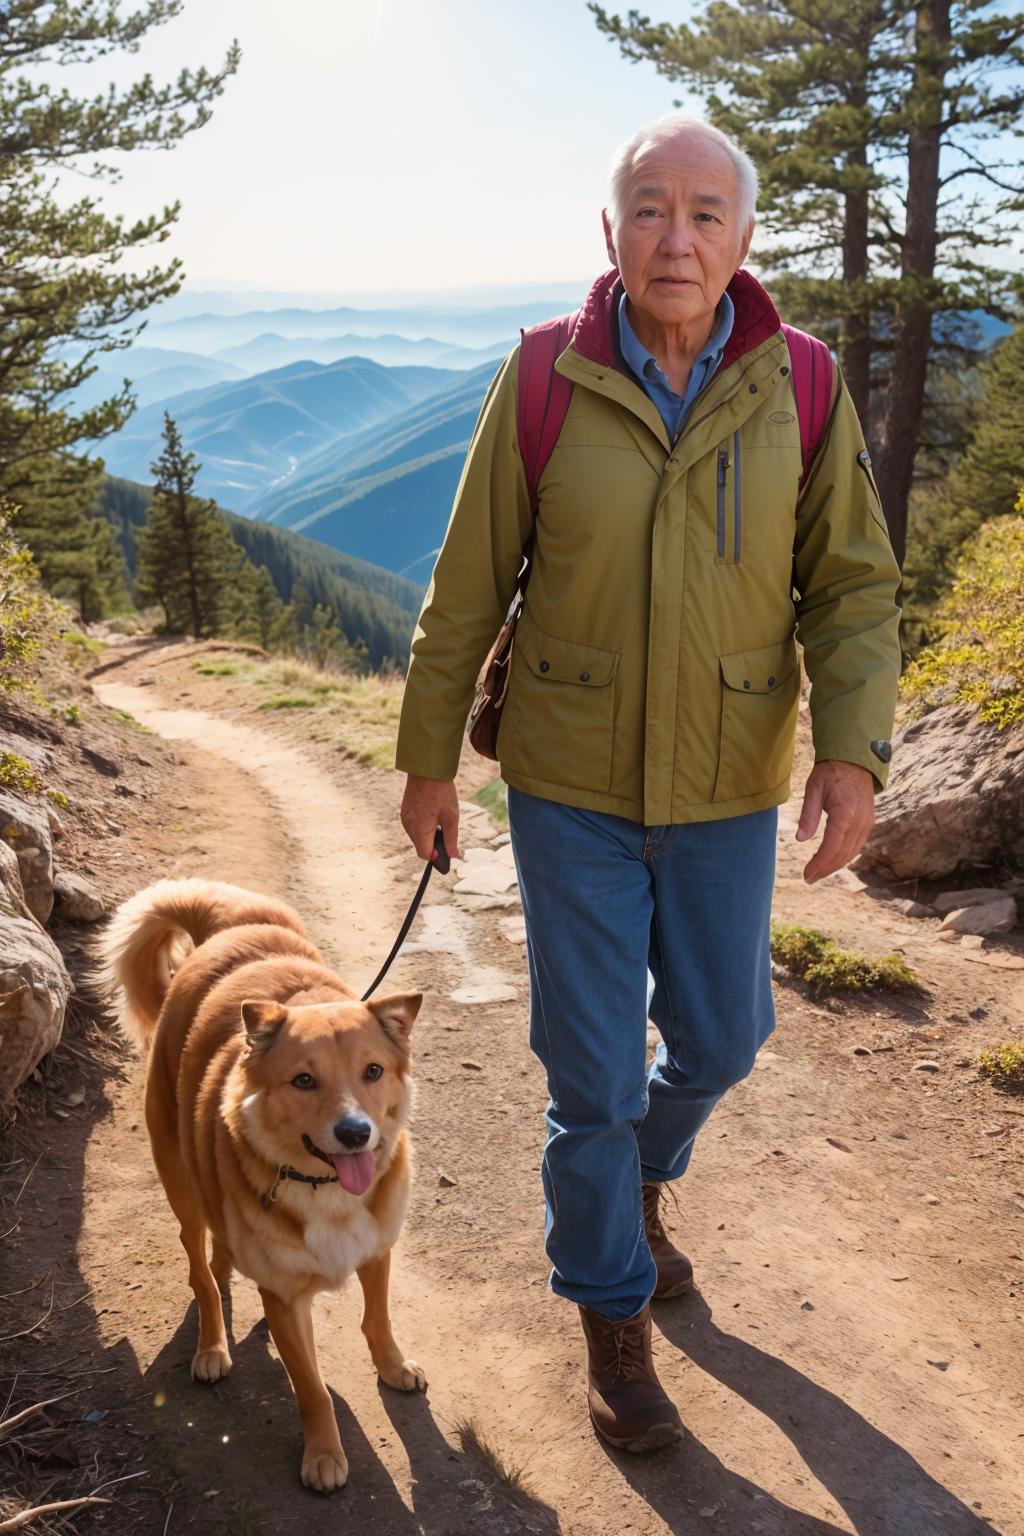 A man and his dog walking on a trail through the mountains.